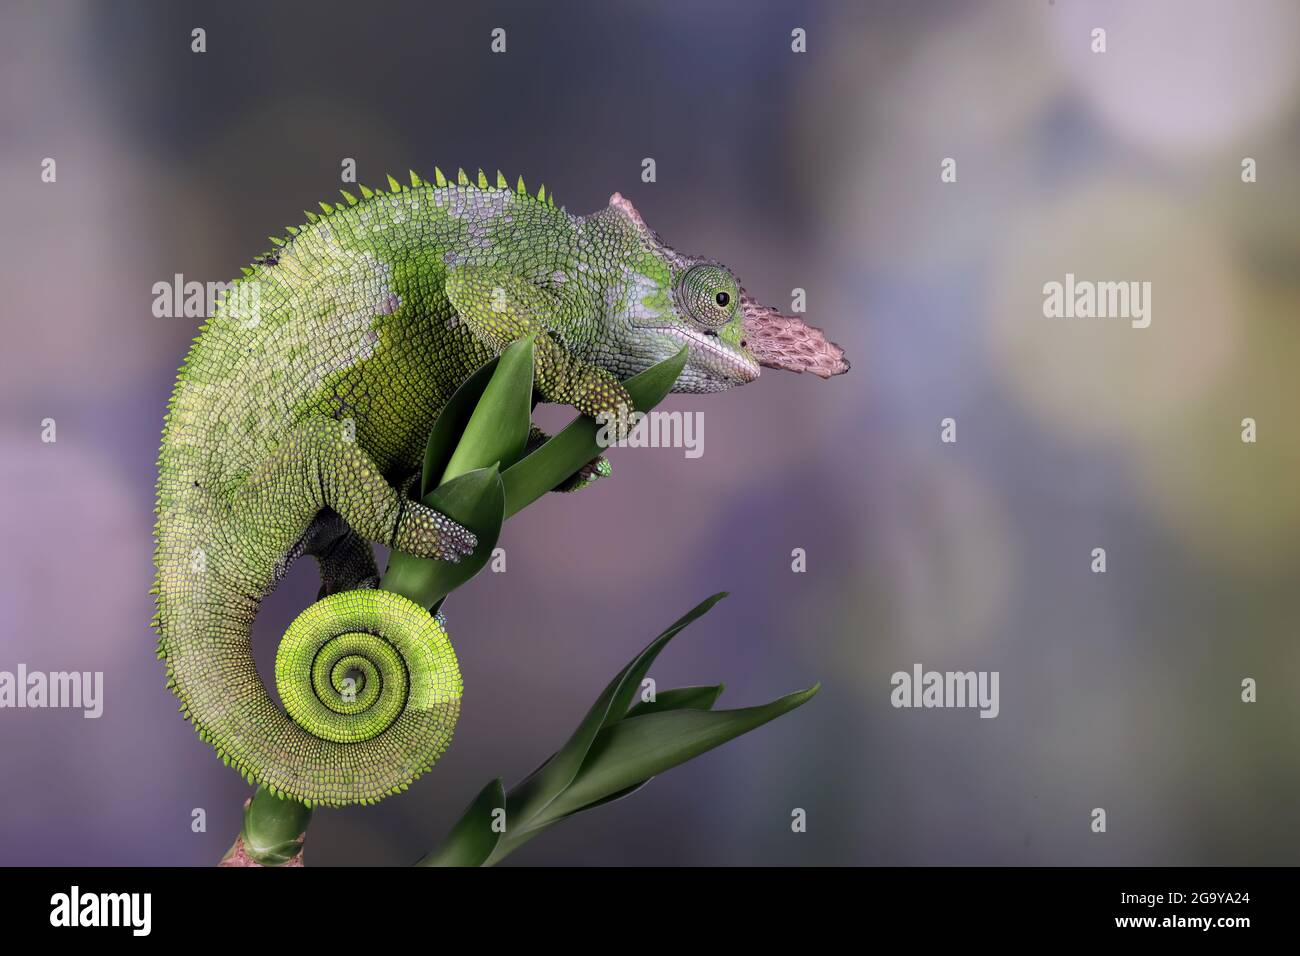 Close-up of a Fischer's Chameleon on a plant, Indonesia Stock Photo